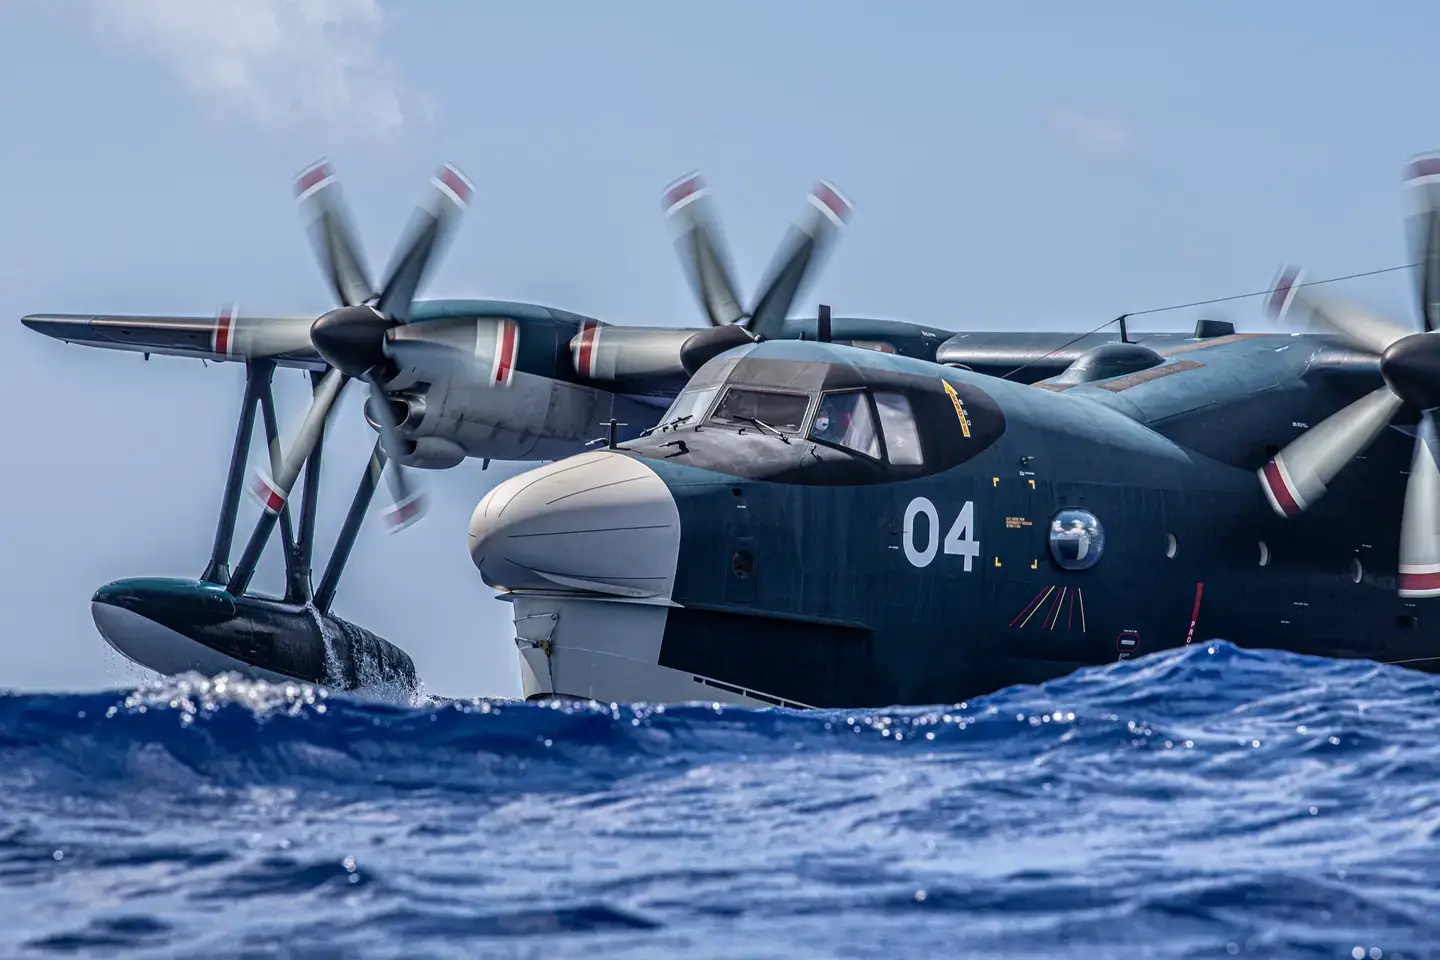 A Japanese ShinMaywa US-2 floats in the ocean during Exercise Cope North 22 off the Island of Tinian near Andersen Air Force Base, Guam, in February this year.&nbsp;<em>U.S. Air Force/Senior Airman Joseph P. LeVeille</em>